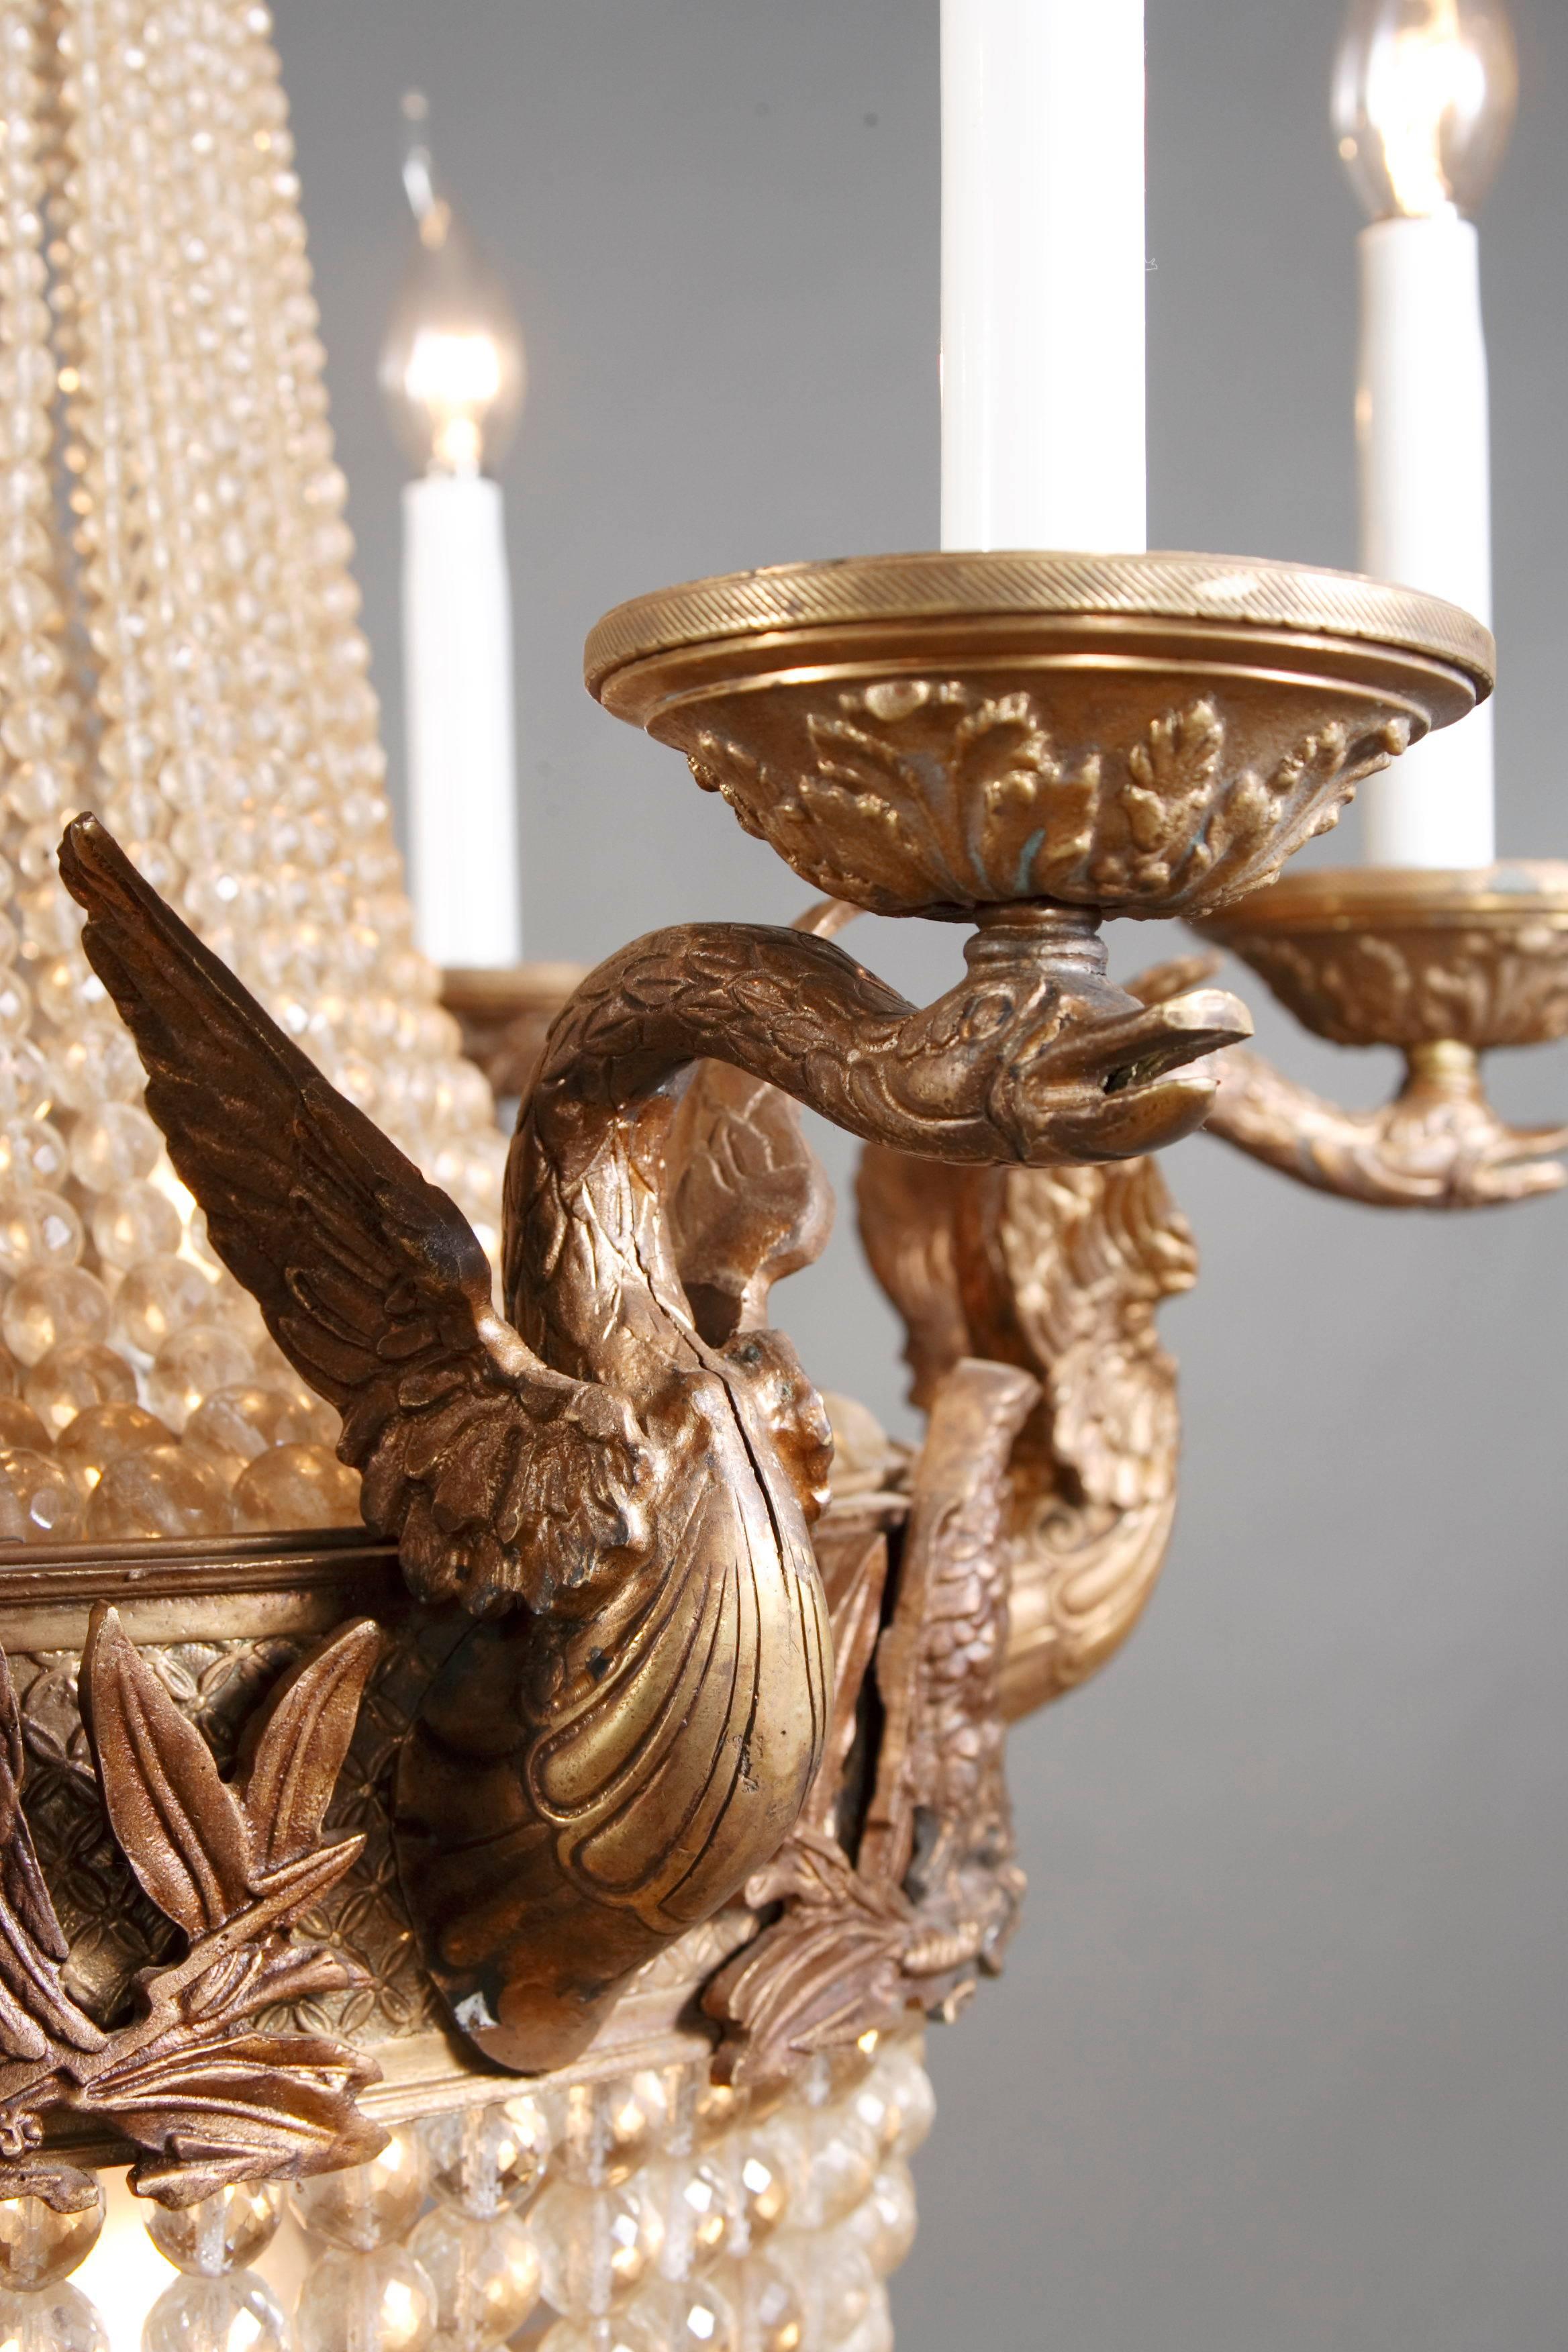 20th Century Empire Style Chandelier Referred to Empress Joséphine 1